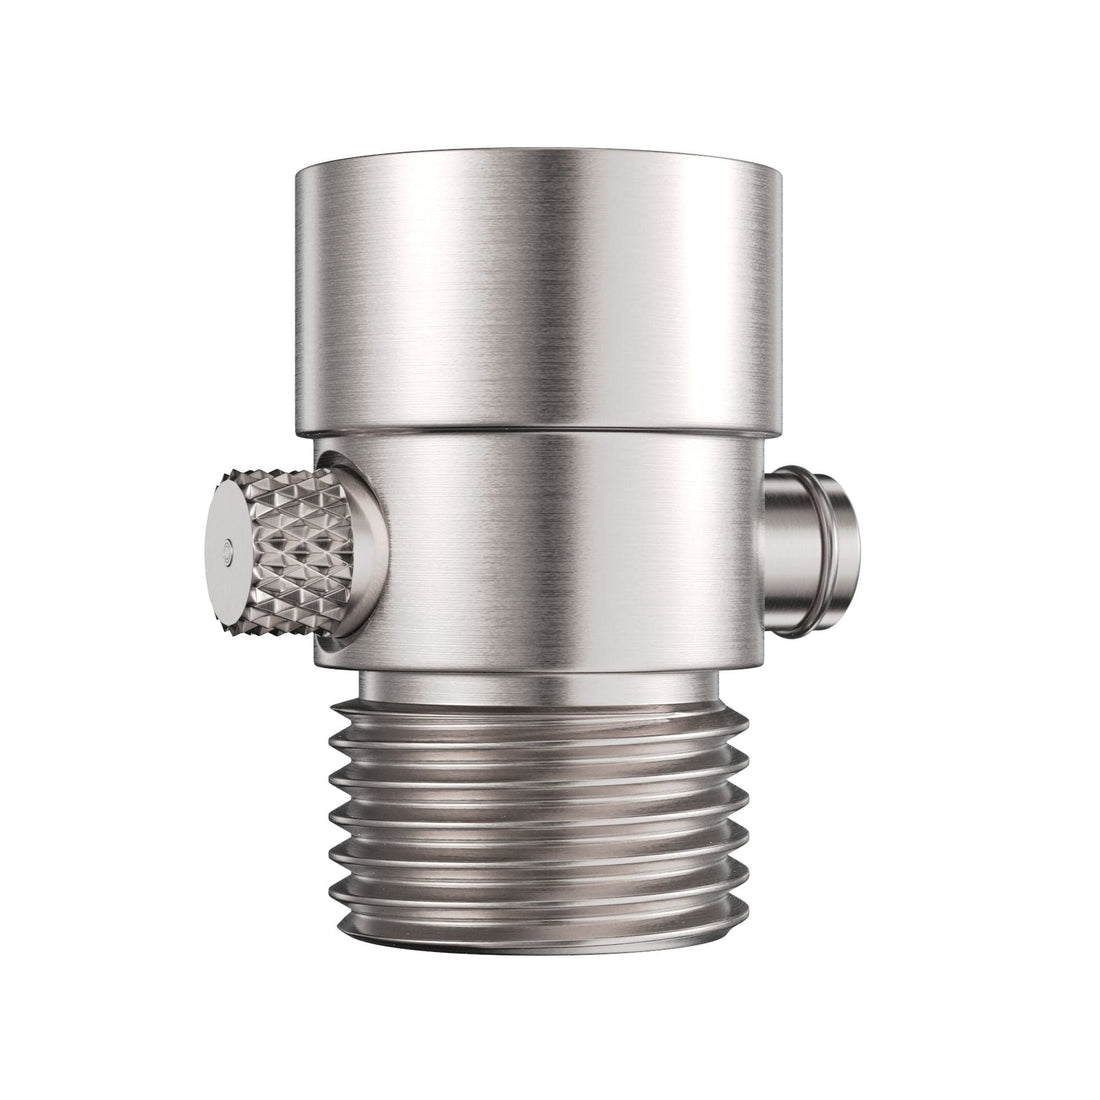 Brushed Nickel Trickle Valve for Shower Heads - The Shower Head Store